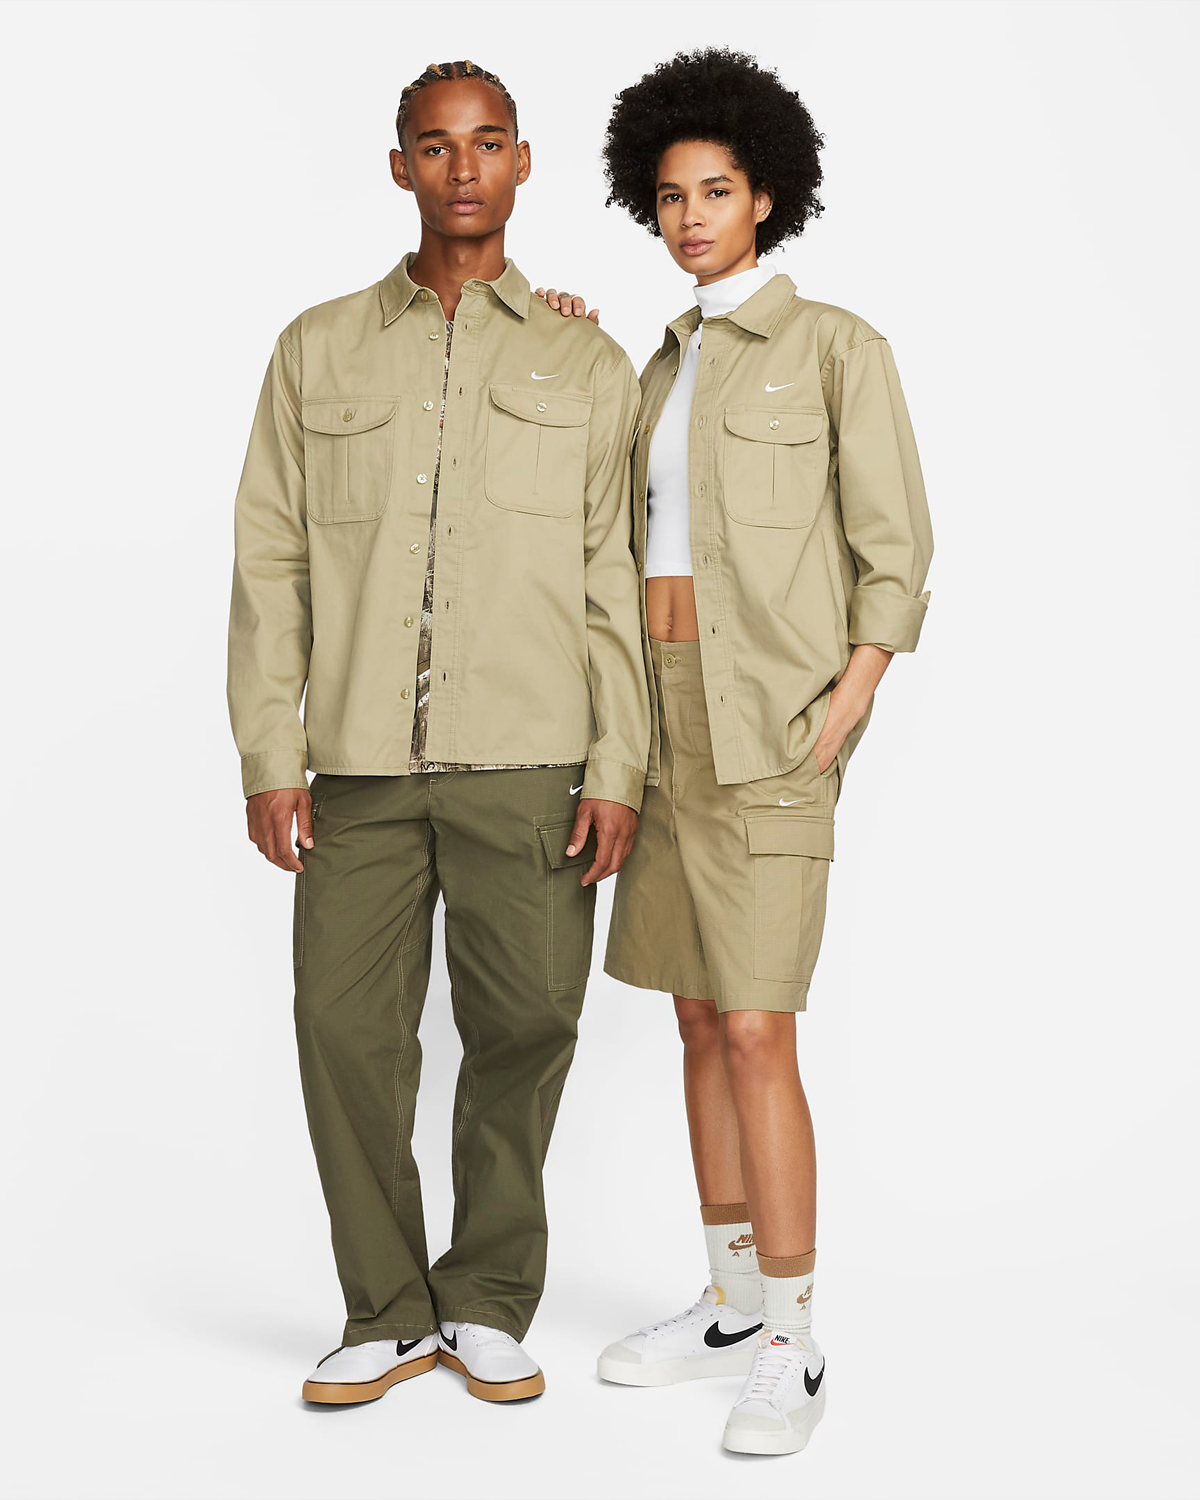 Nike SB Long Sleeve Button Up Top Neutral Olive Outfit